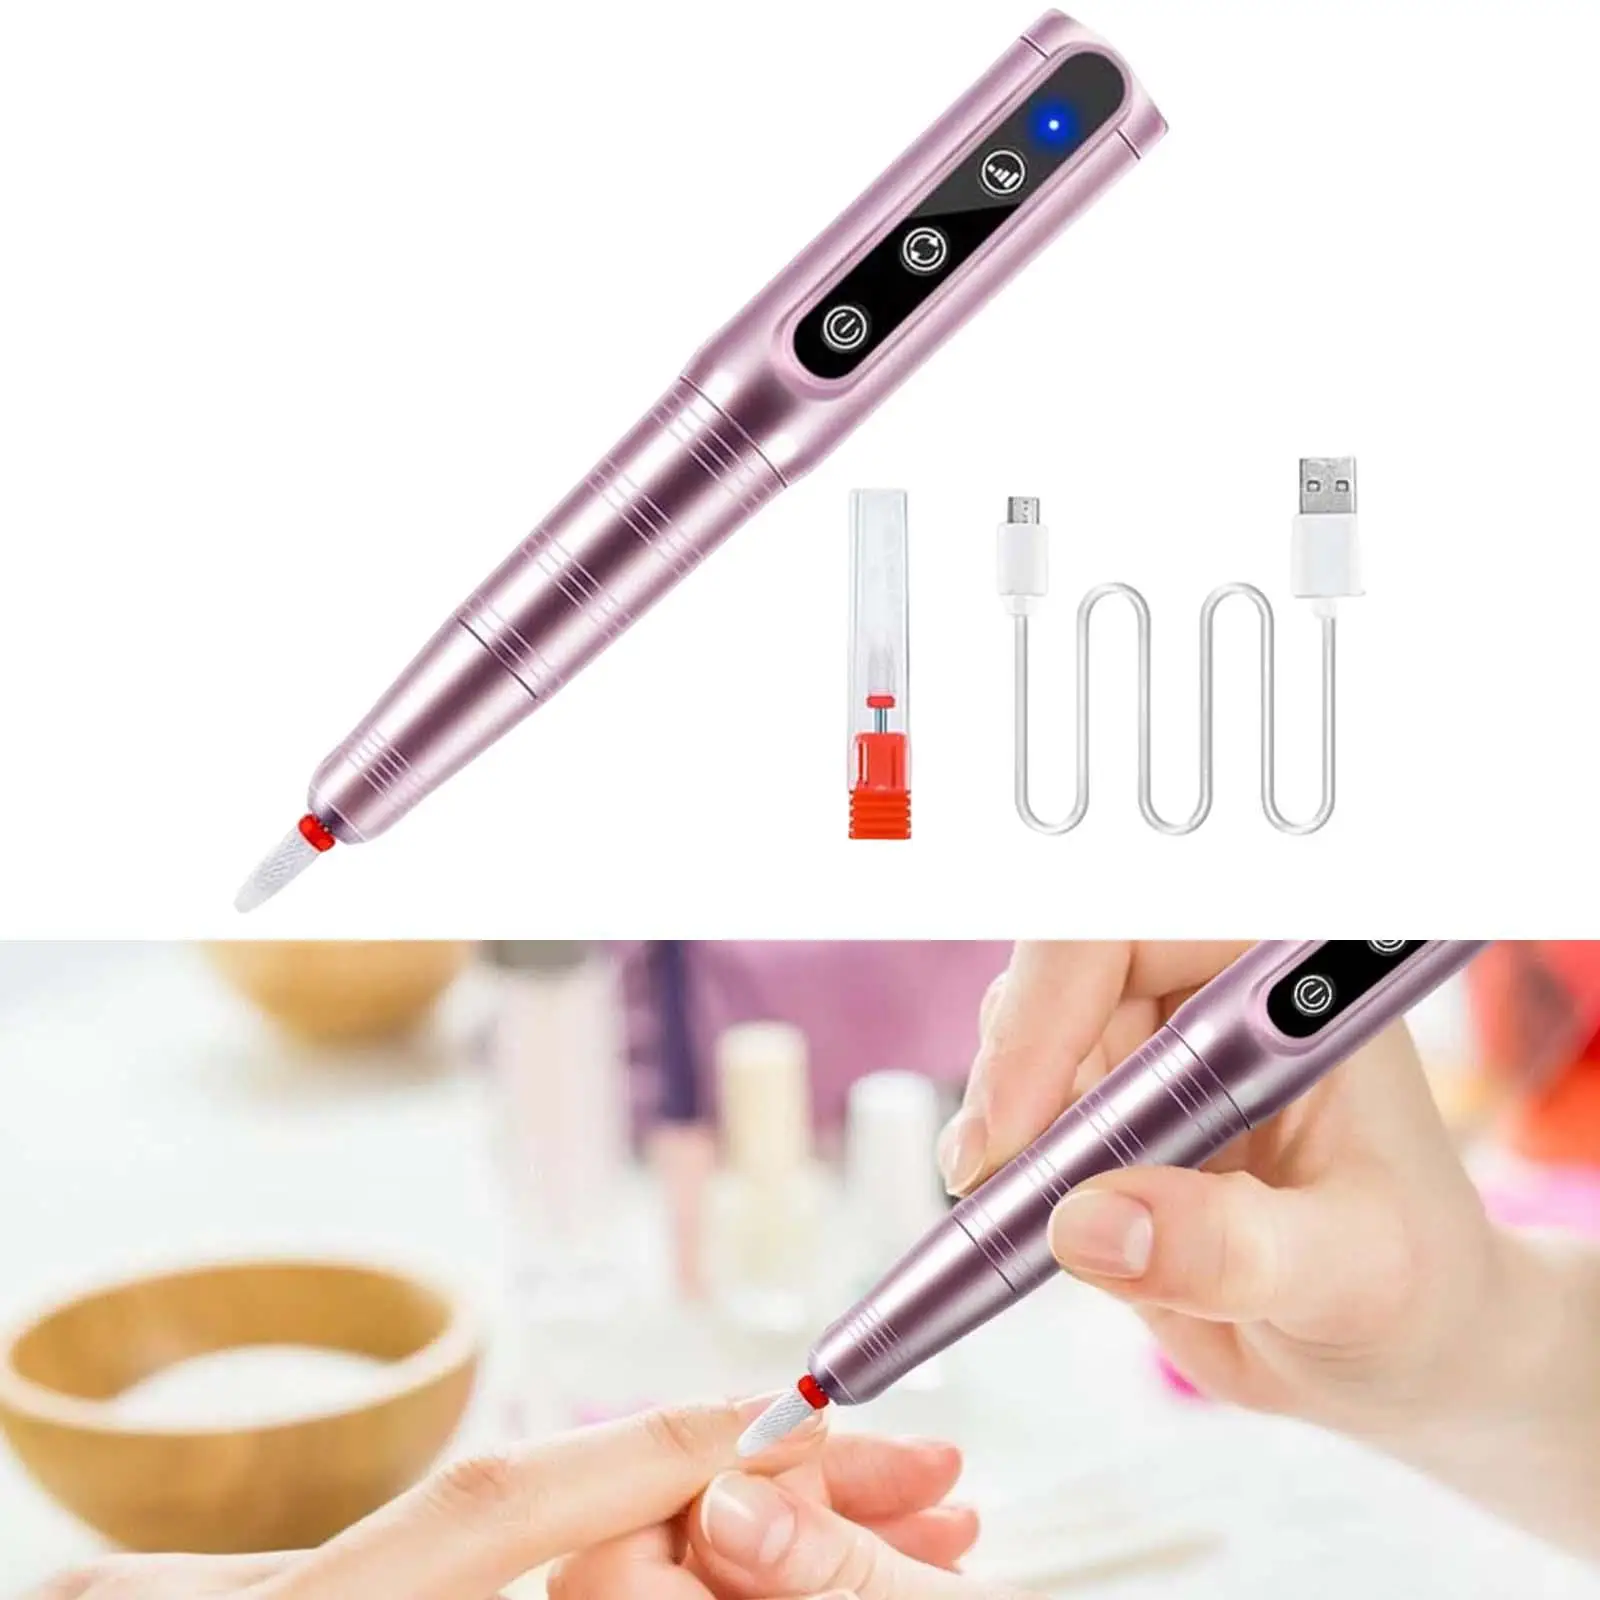 Professional Nail Filer Nail Tools 26000RPM Portable Manicure Pedicure Machine Electric  for Removing Acrylic Gel Nails